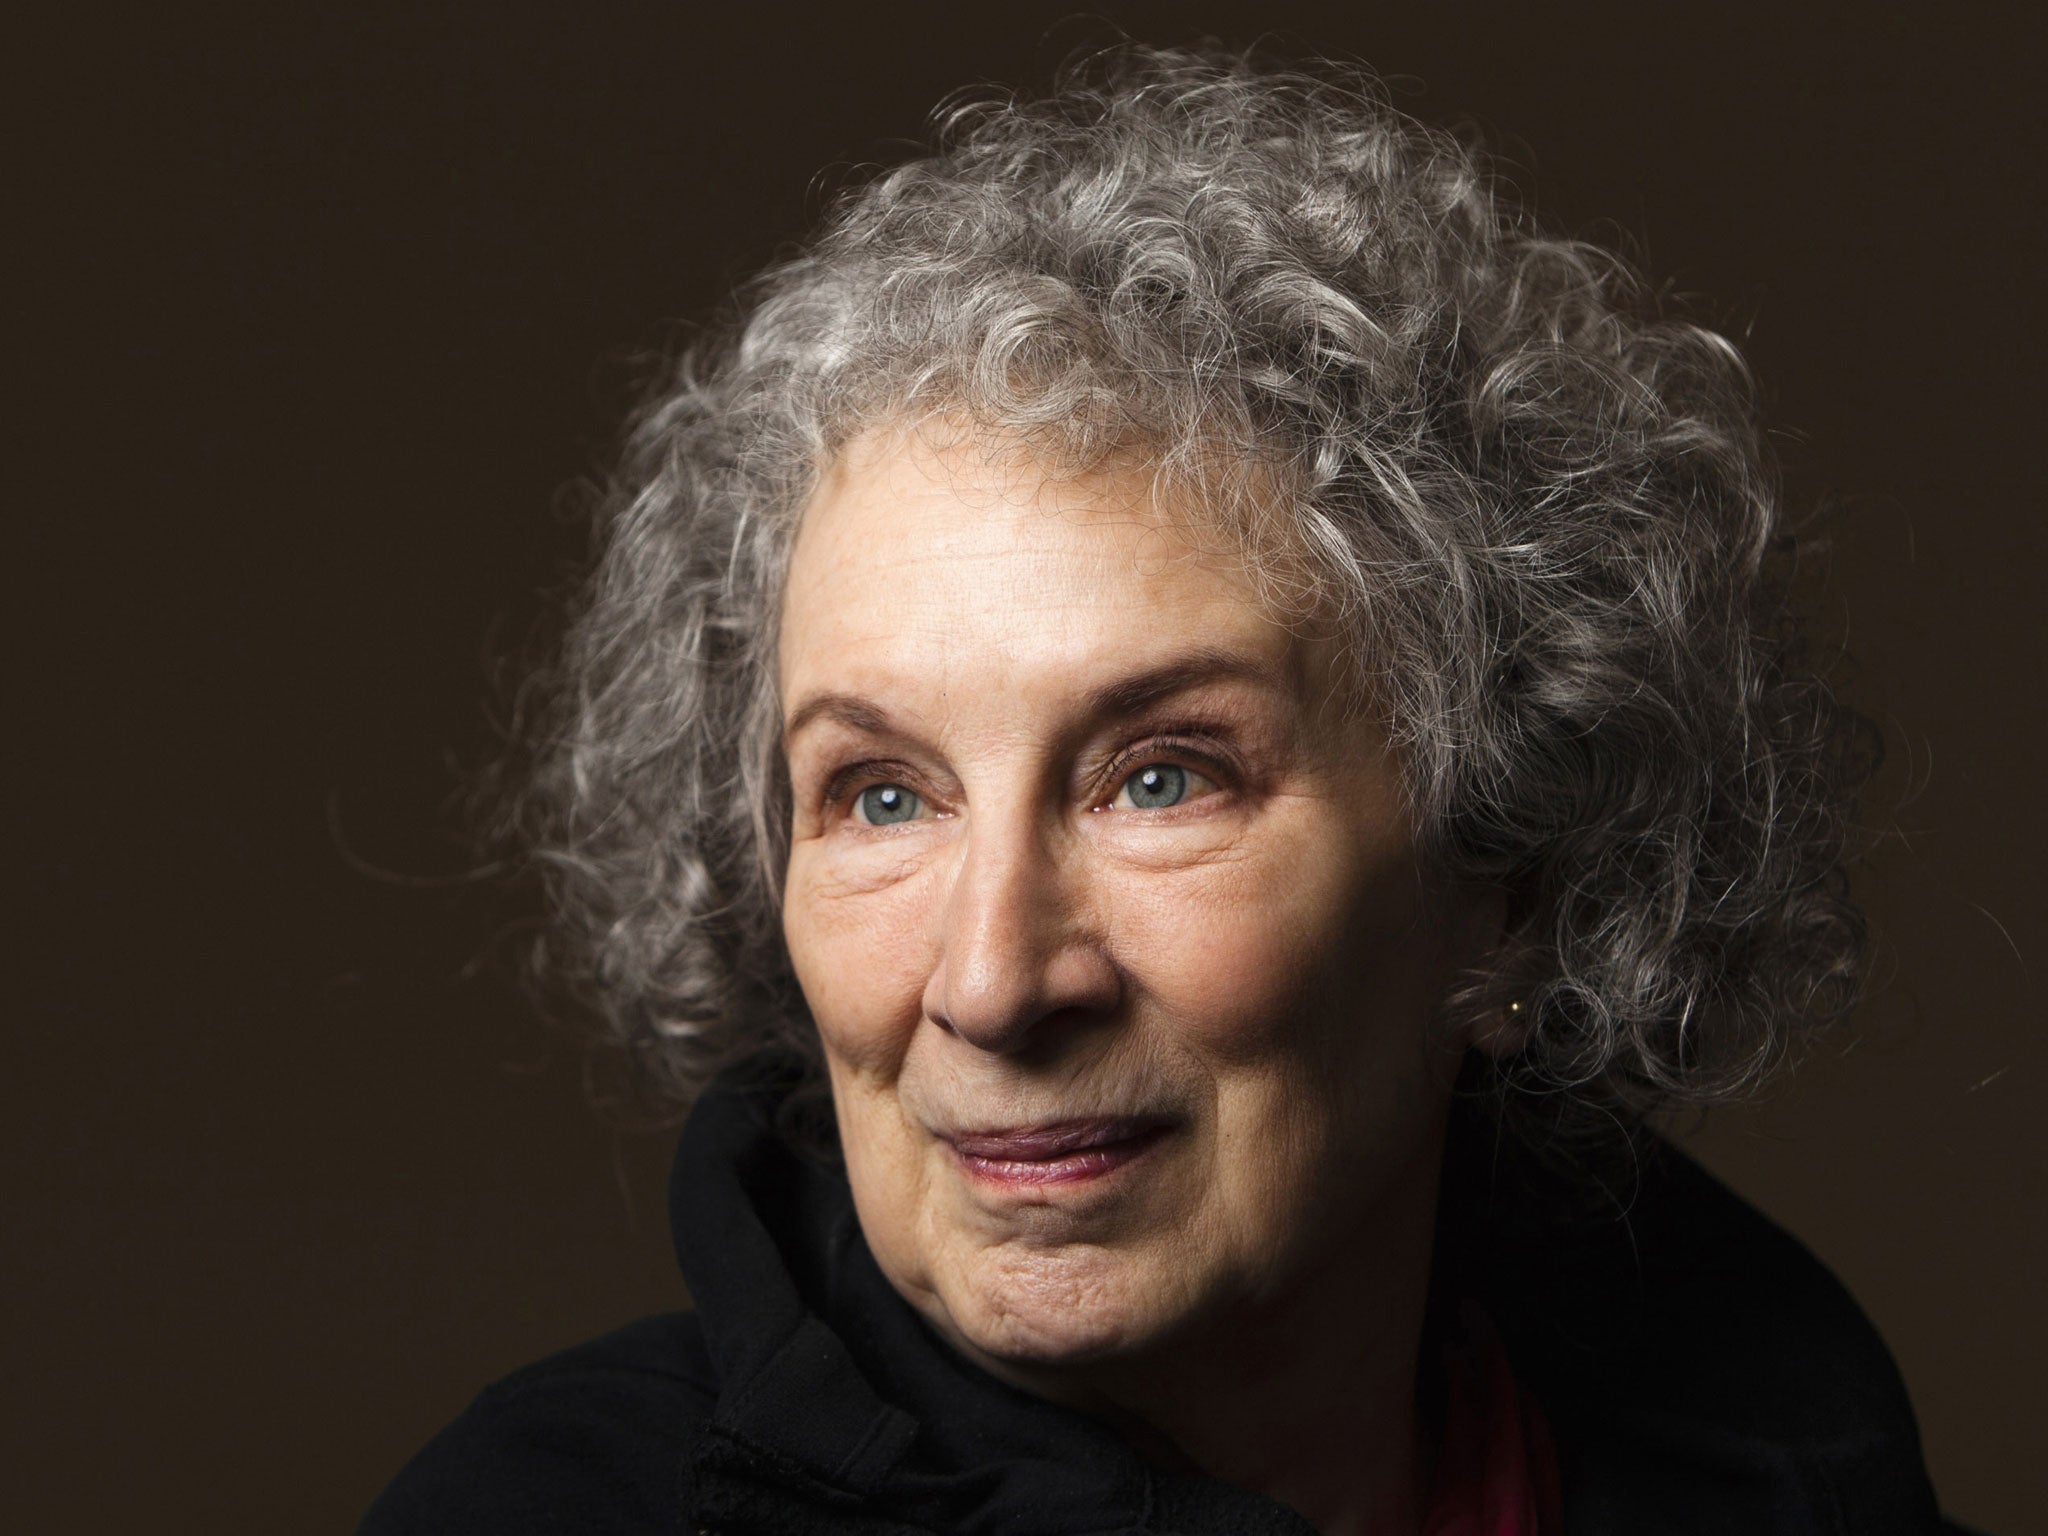 Book launch: For publication day, Atwood will sail to the UK aboard the Queen Mary 2